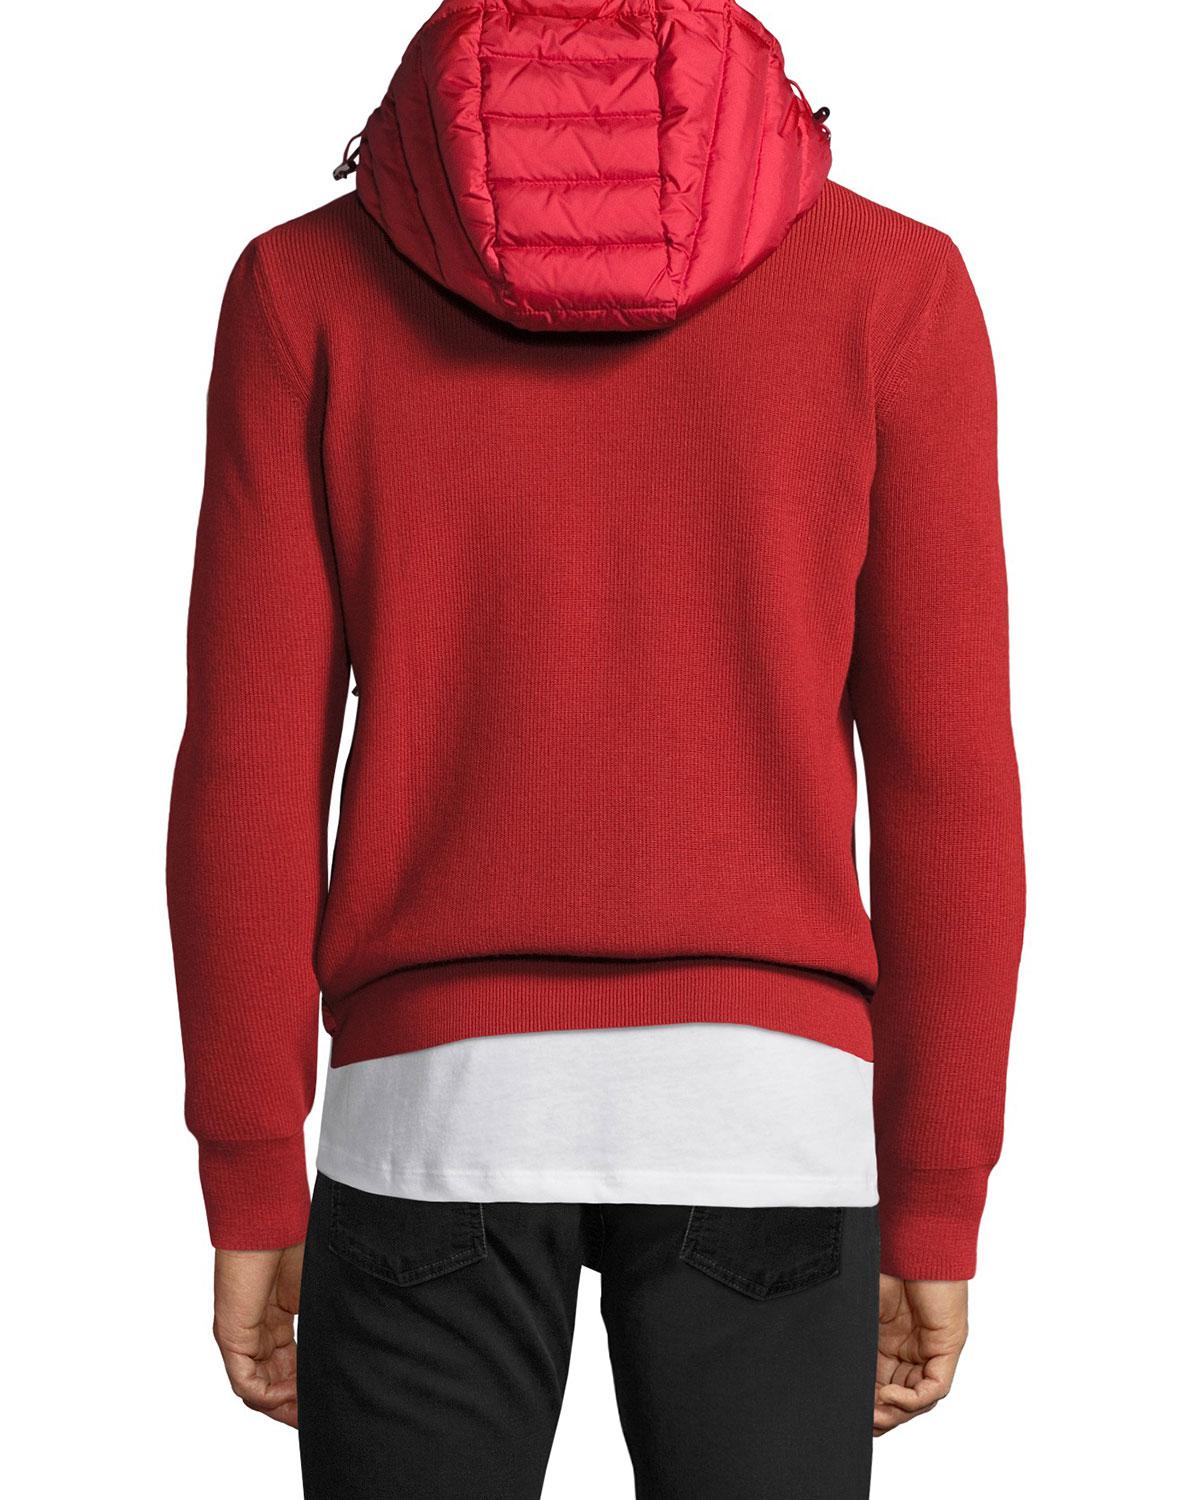 Moncler Hooded Puffer-front Zip Sweater in Red for Men - Lyst